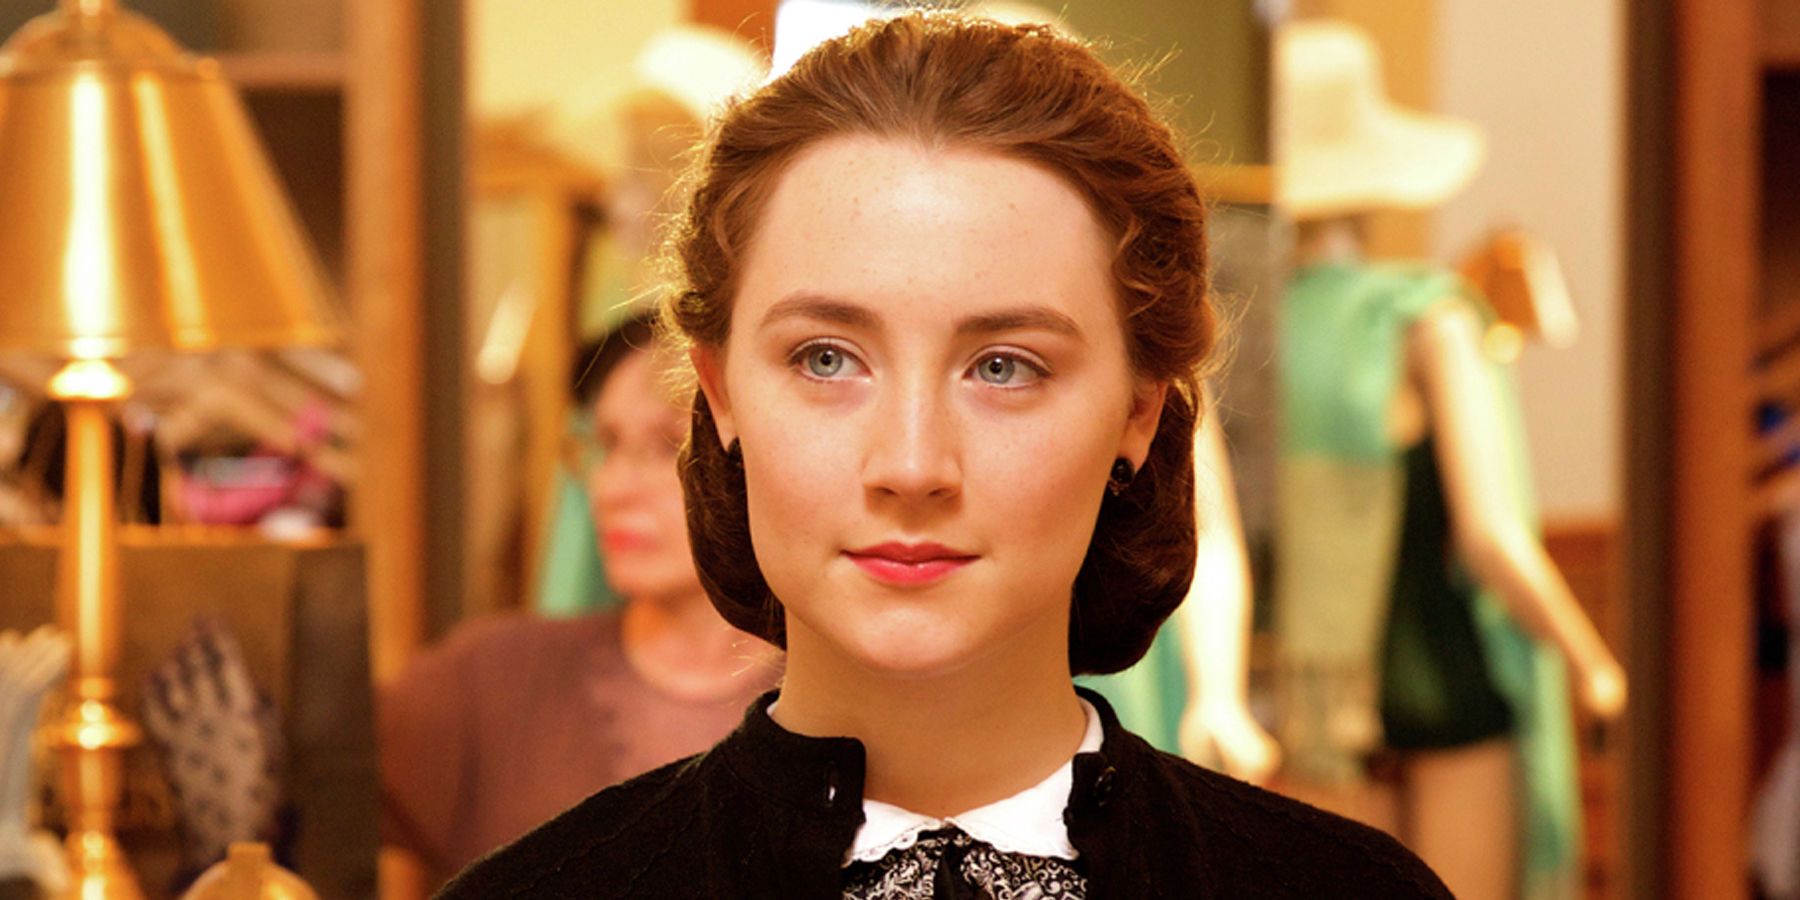 10 Best Saoirse Ronan Movies (According To Rotten Tomatoes)